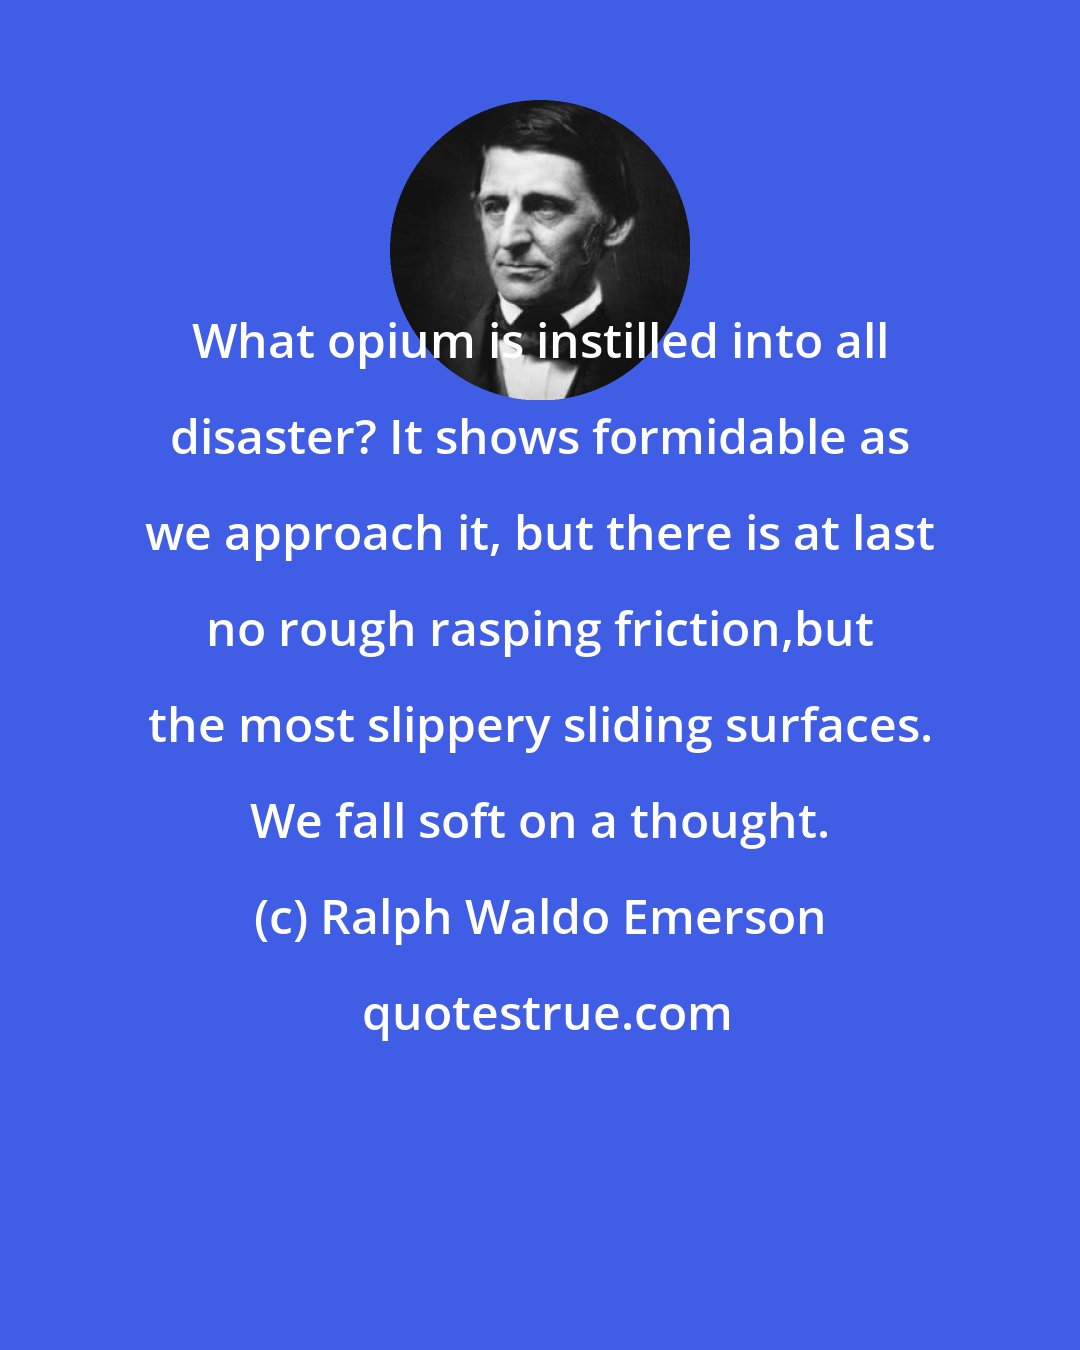 Ralph Waldo Emerson: What opium is instilled into all disaster? It shows formidable as we approach it, but there is at last no rough rasping friction,but the most slippery sliding surfaces. We fall soft on a thought.